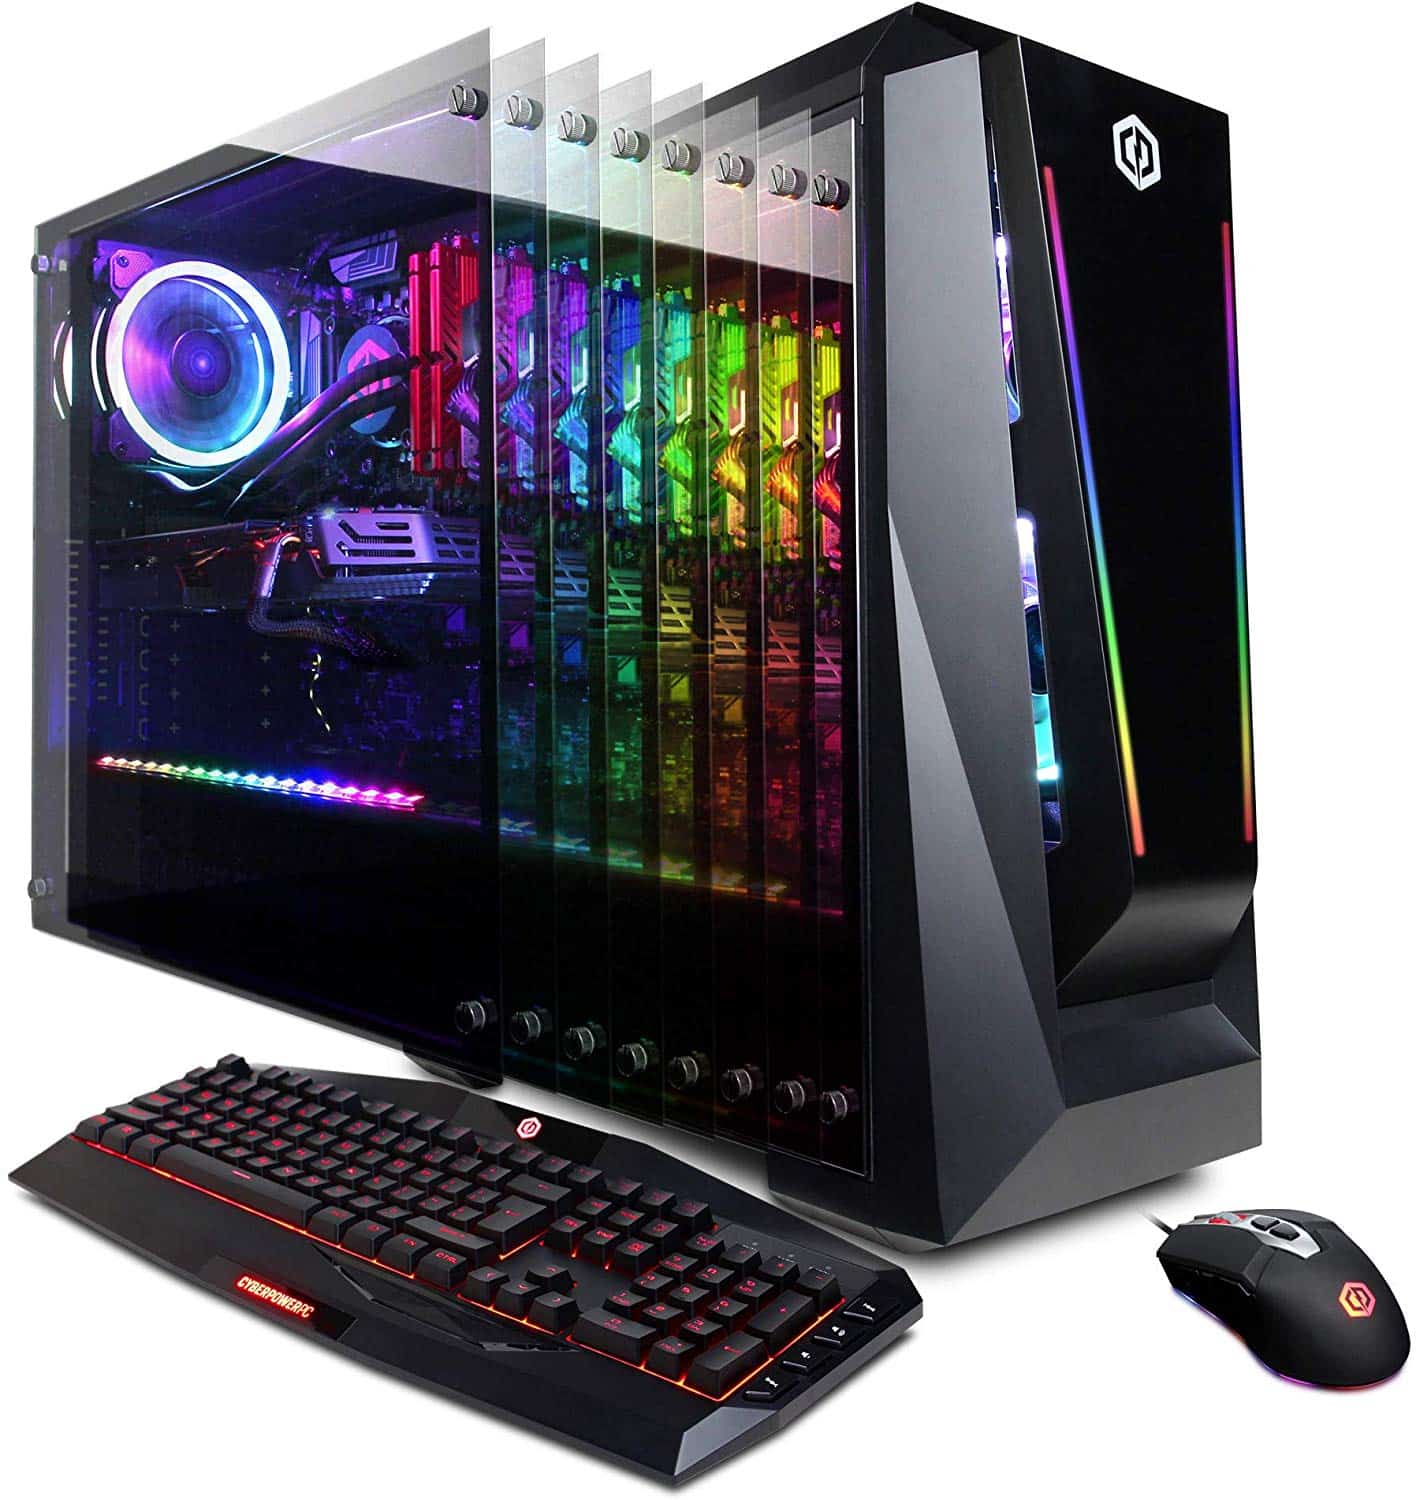 Best Gaming Pc Under 2000 Then You Are At The Right Place.